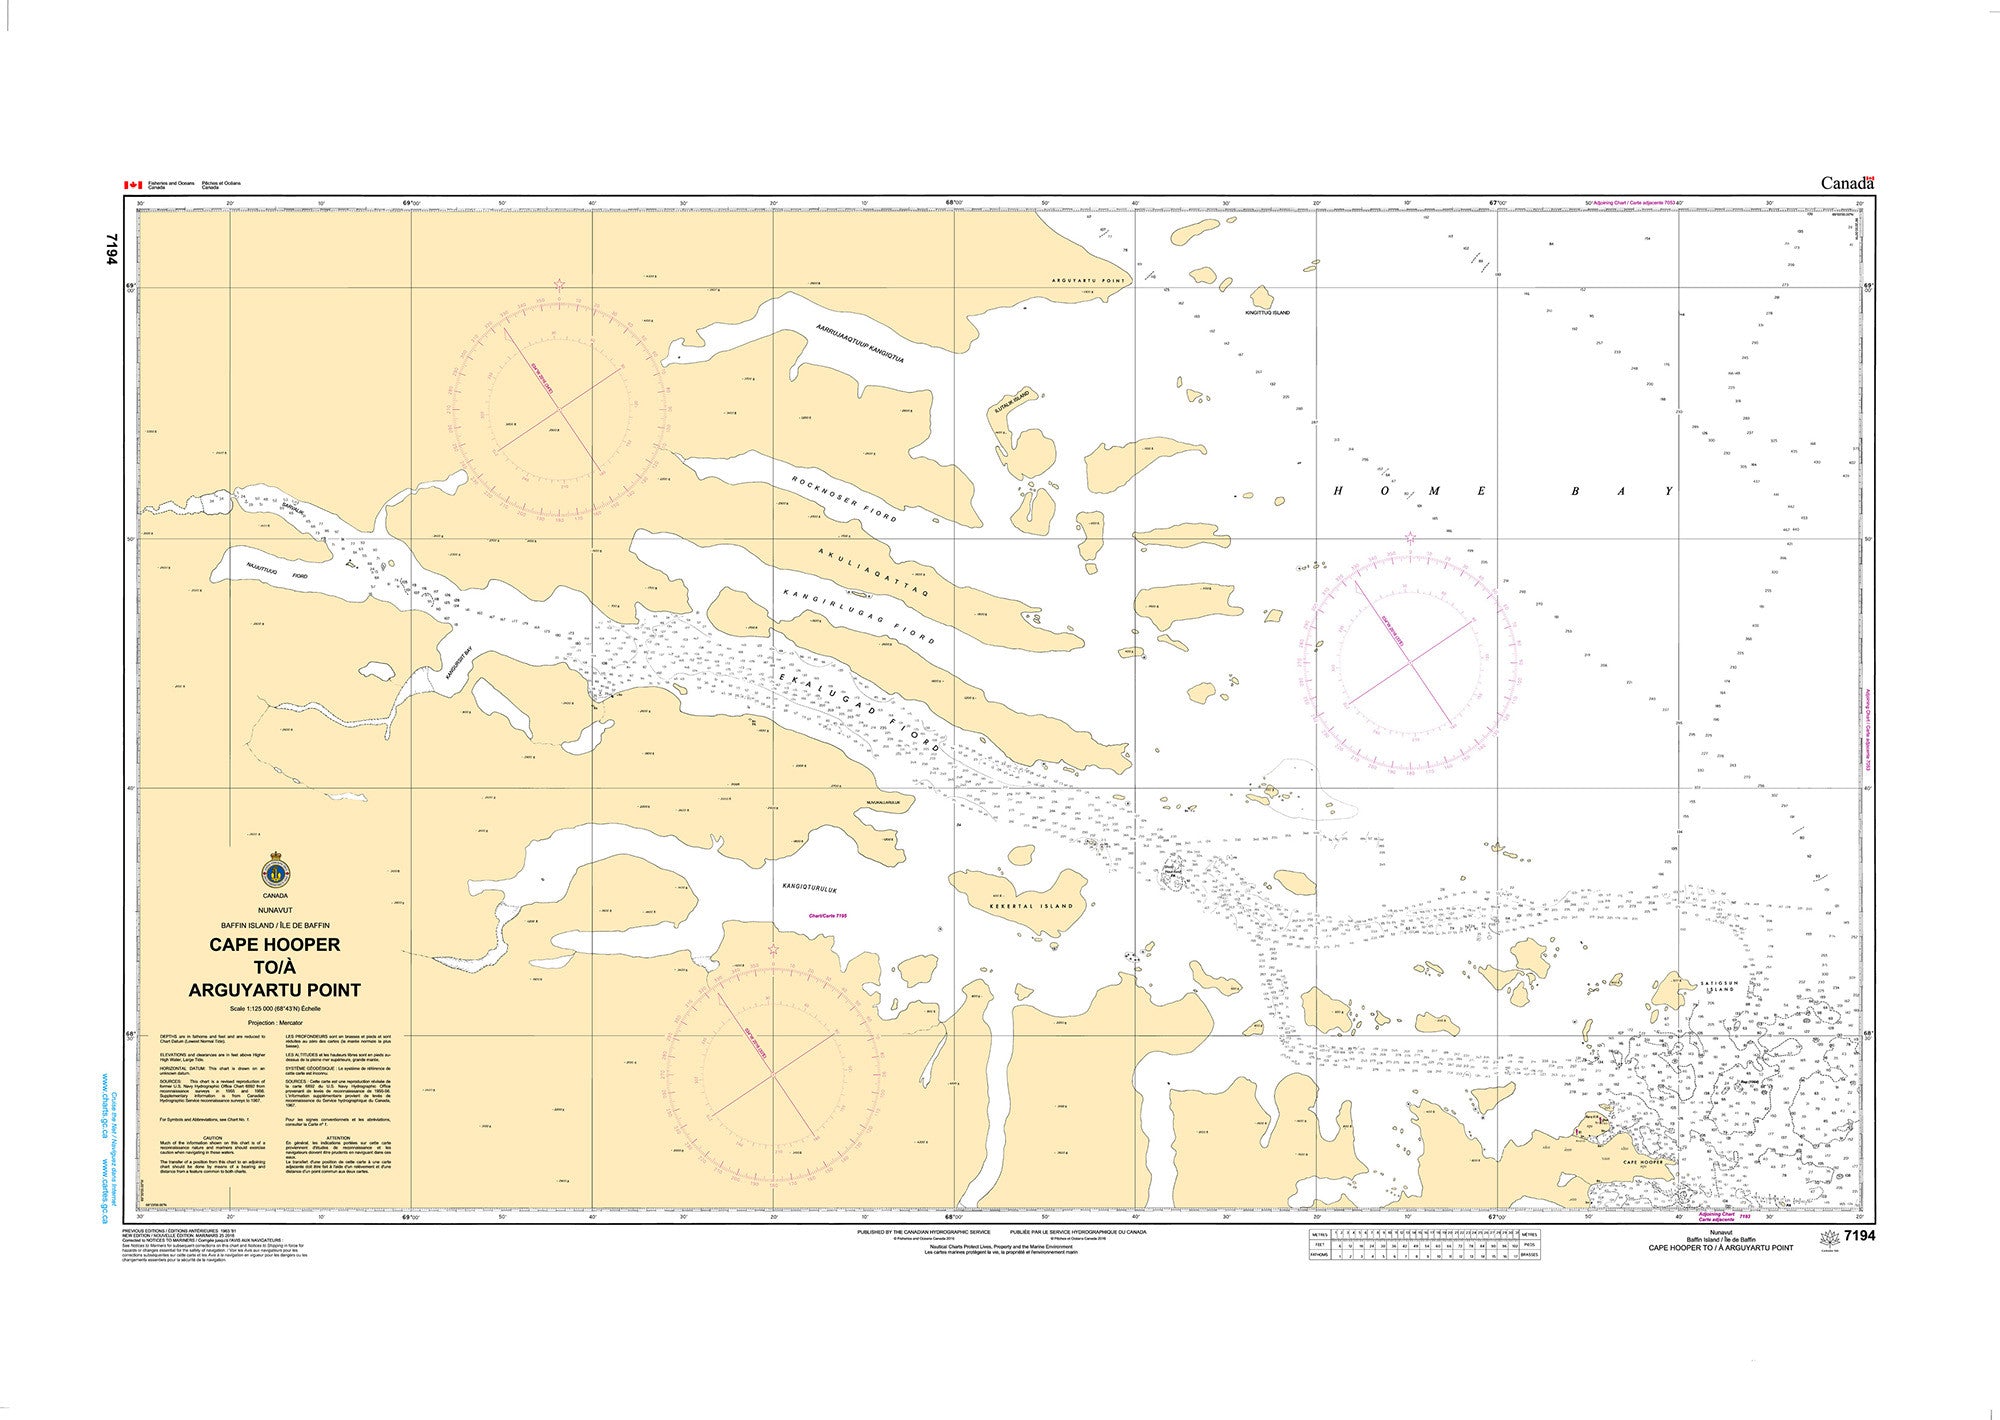 Canadian Hydrographic Service Nautical Chart CHS7194: Cape Hooper To Arguyartu Point Including Ekalugad Fiord